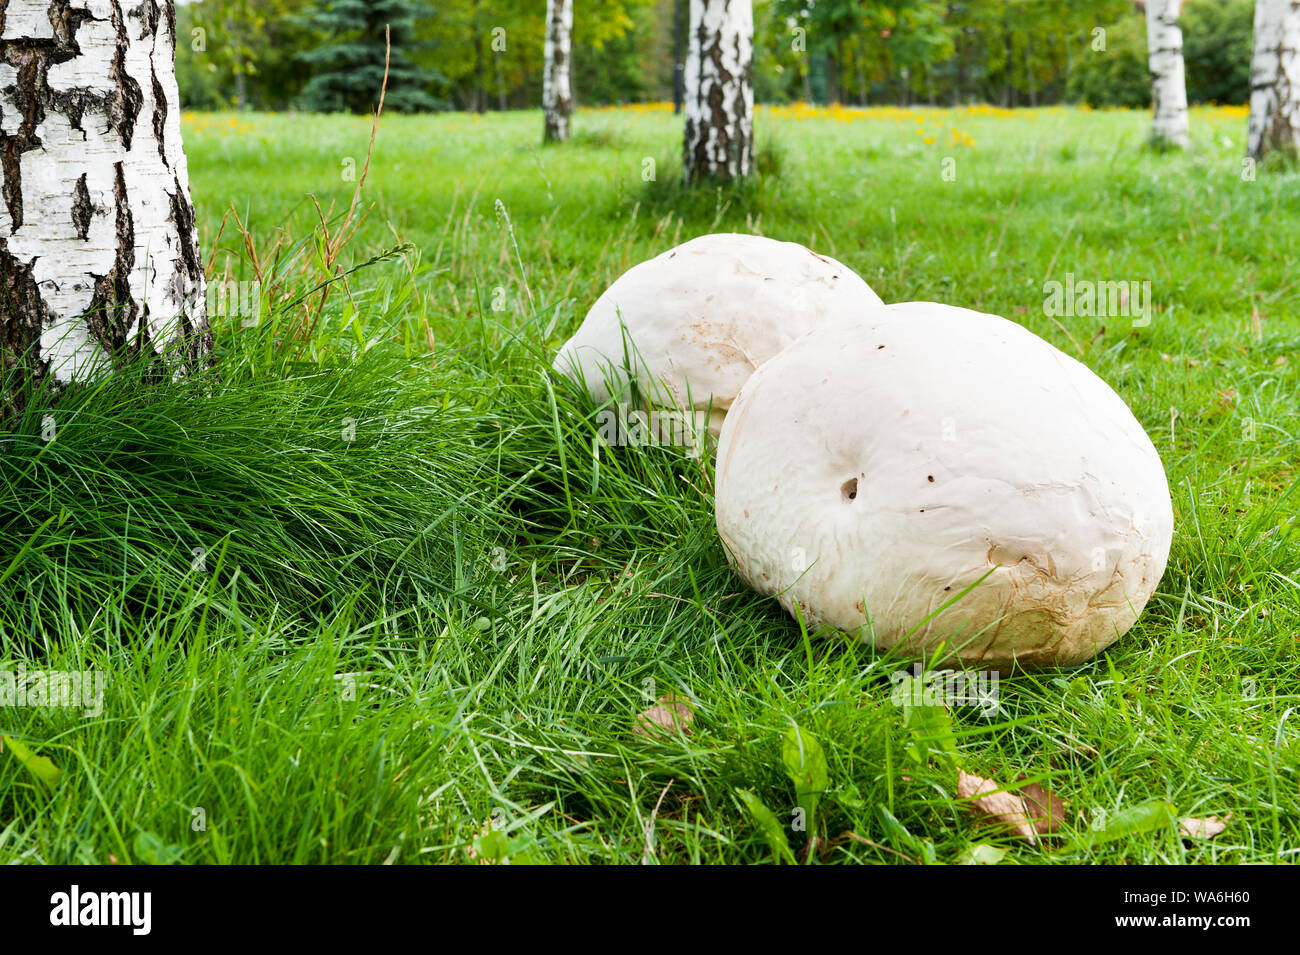 Giant puffball mushroom on the grass in park Stock Photo